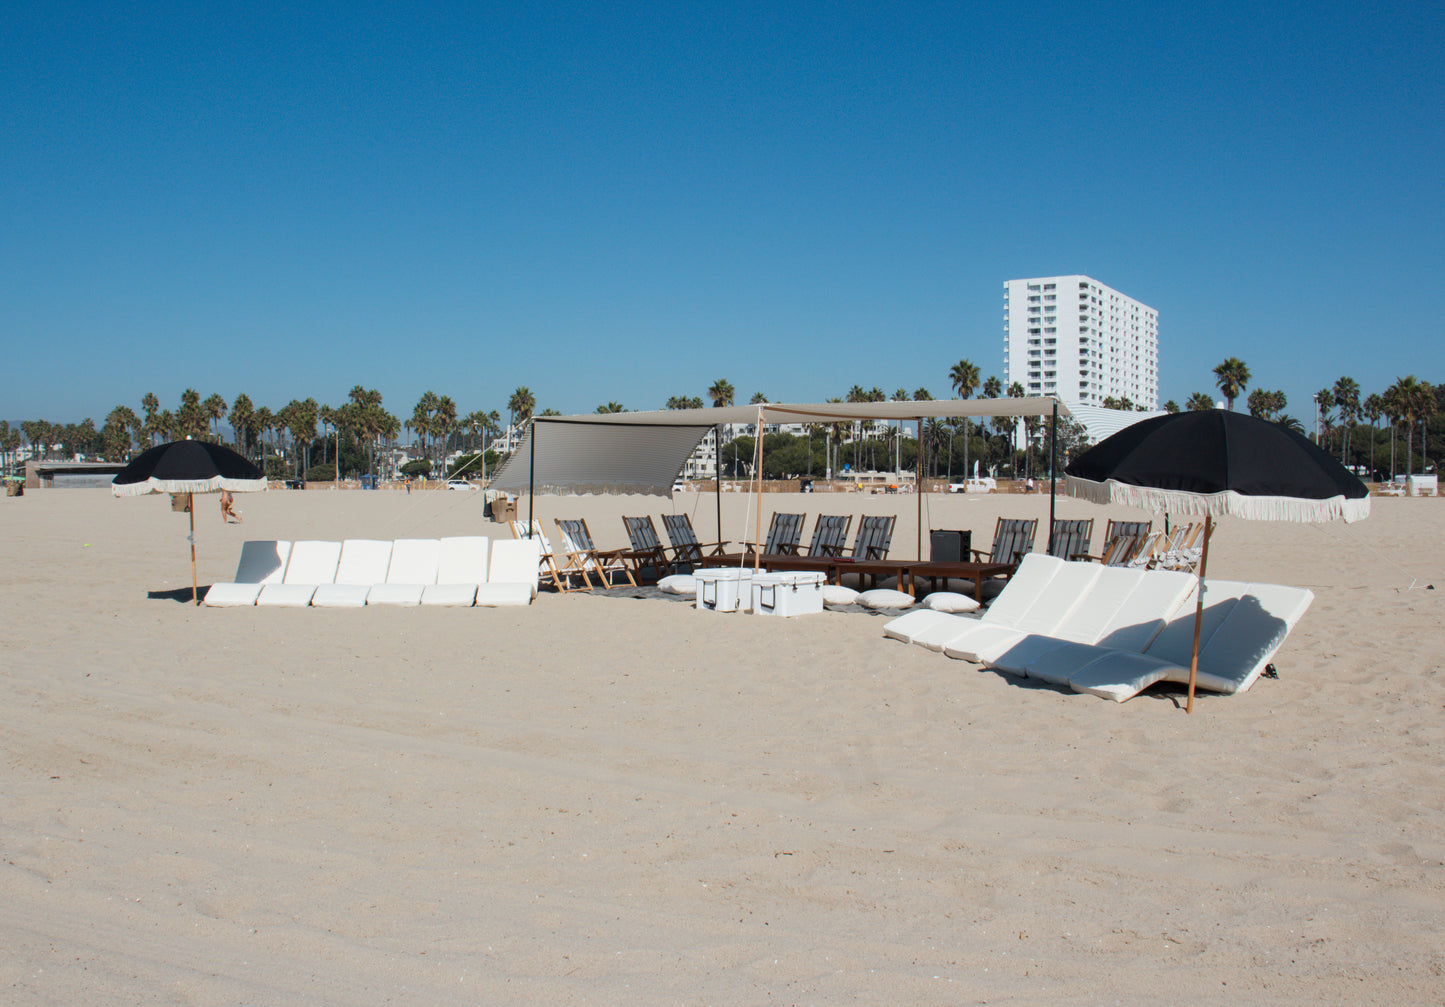 Large beach lounge rental with beach lounges and beach umbrellas in Santa Monica on the beach